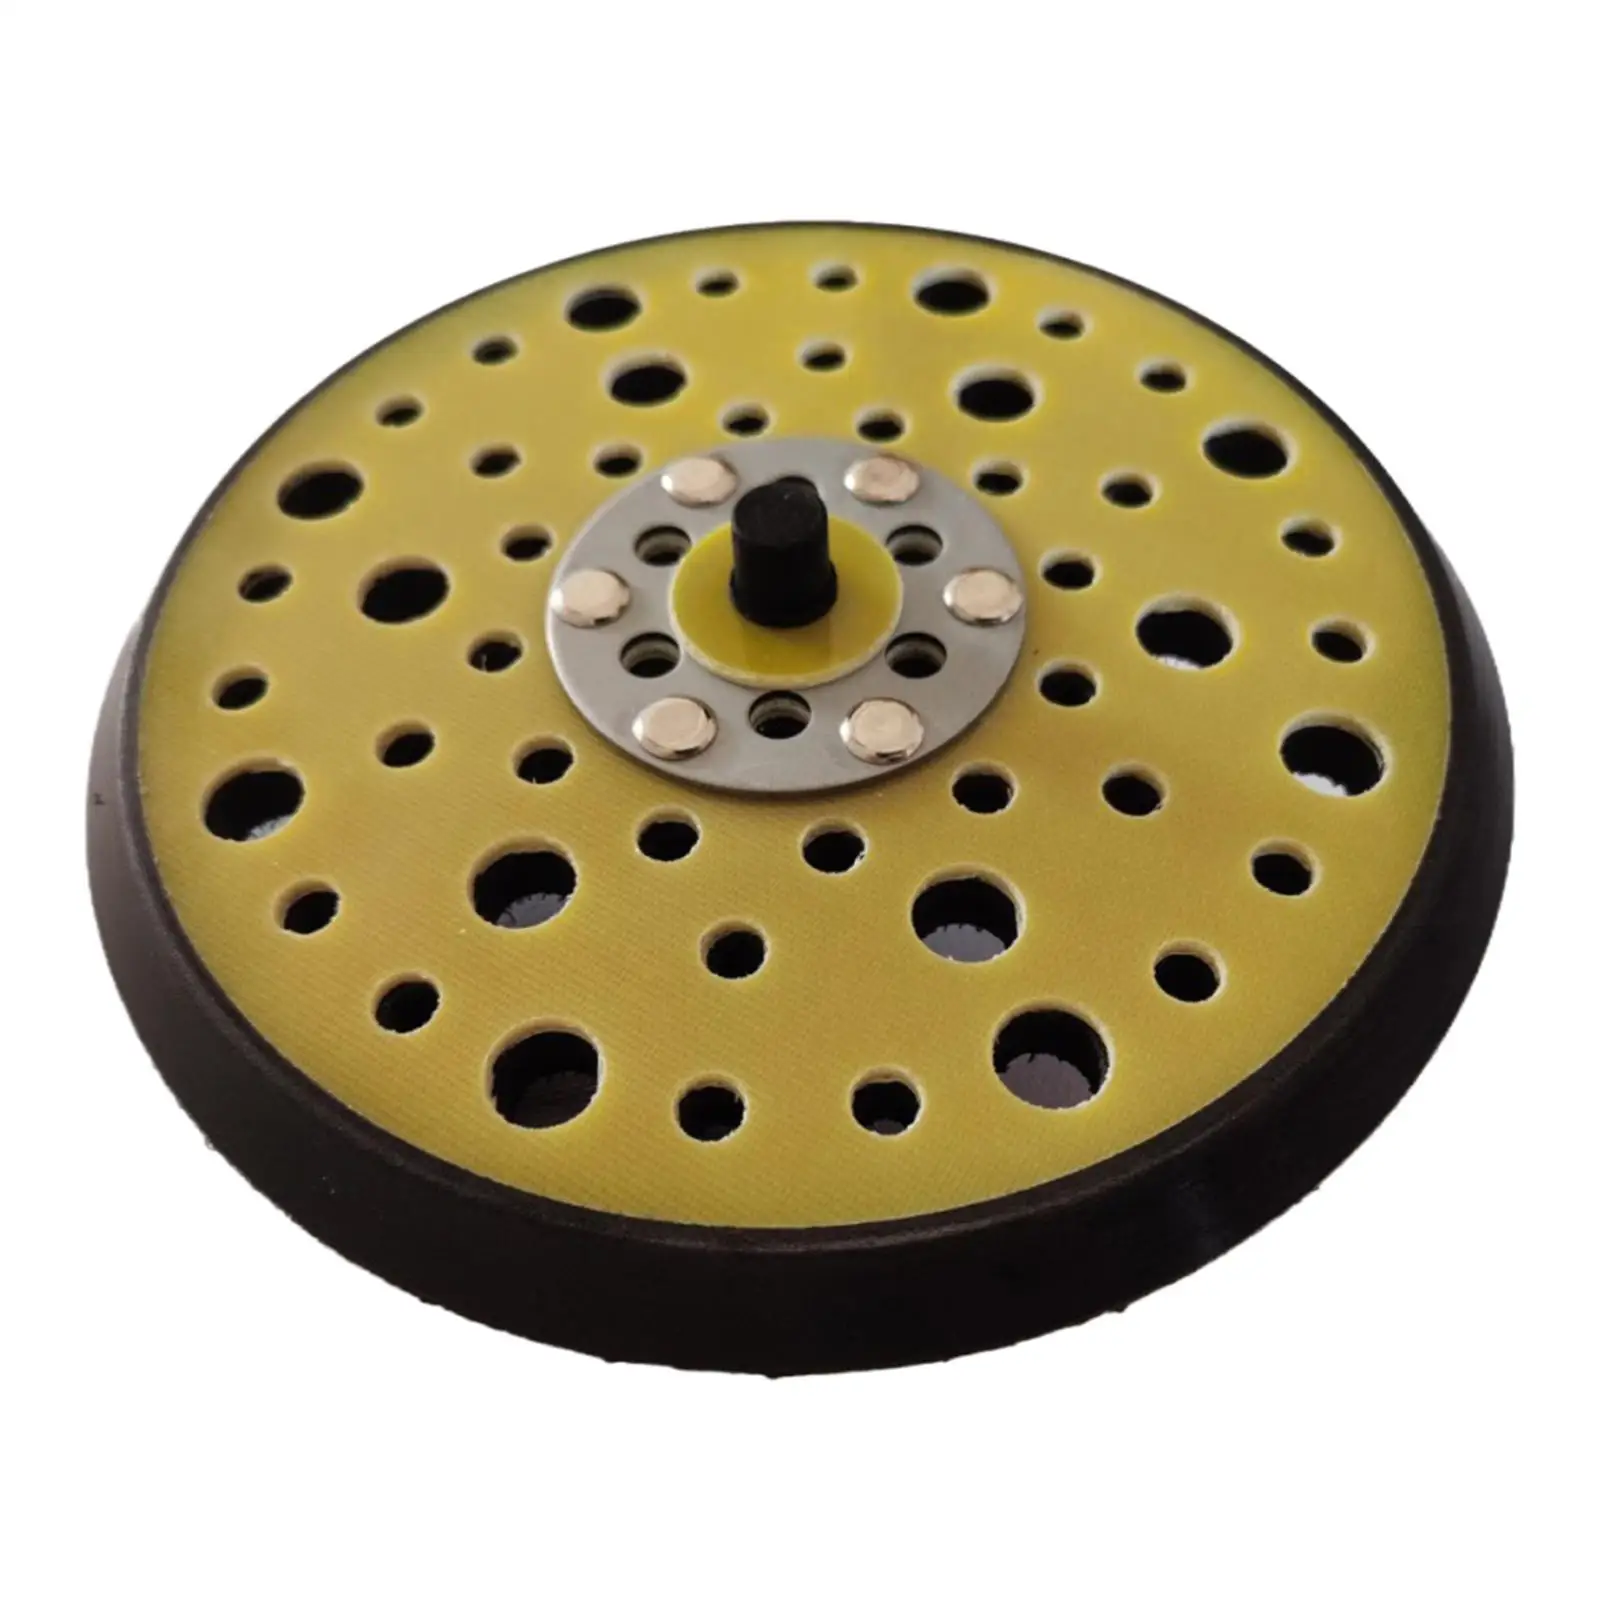 Sanding Backing Polishing Pad Disc Power Tool Accessory Accs for Woodworking